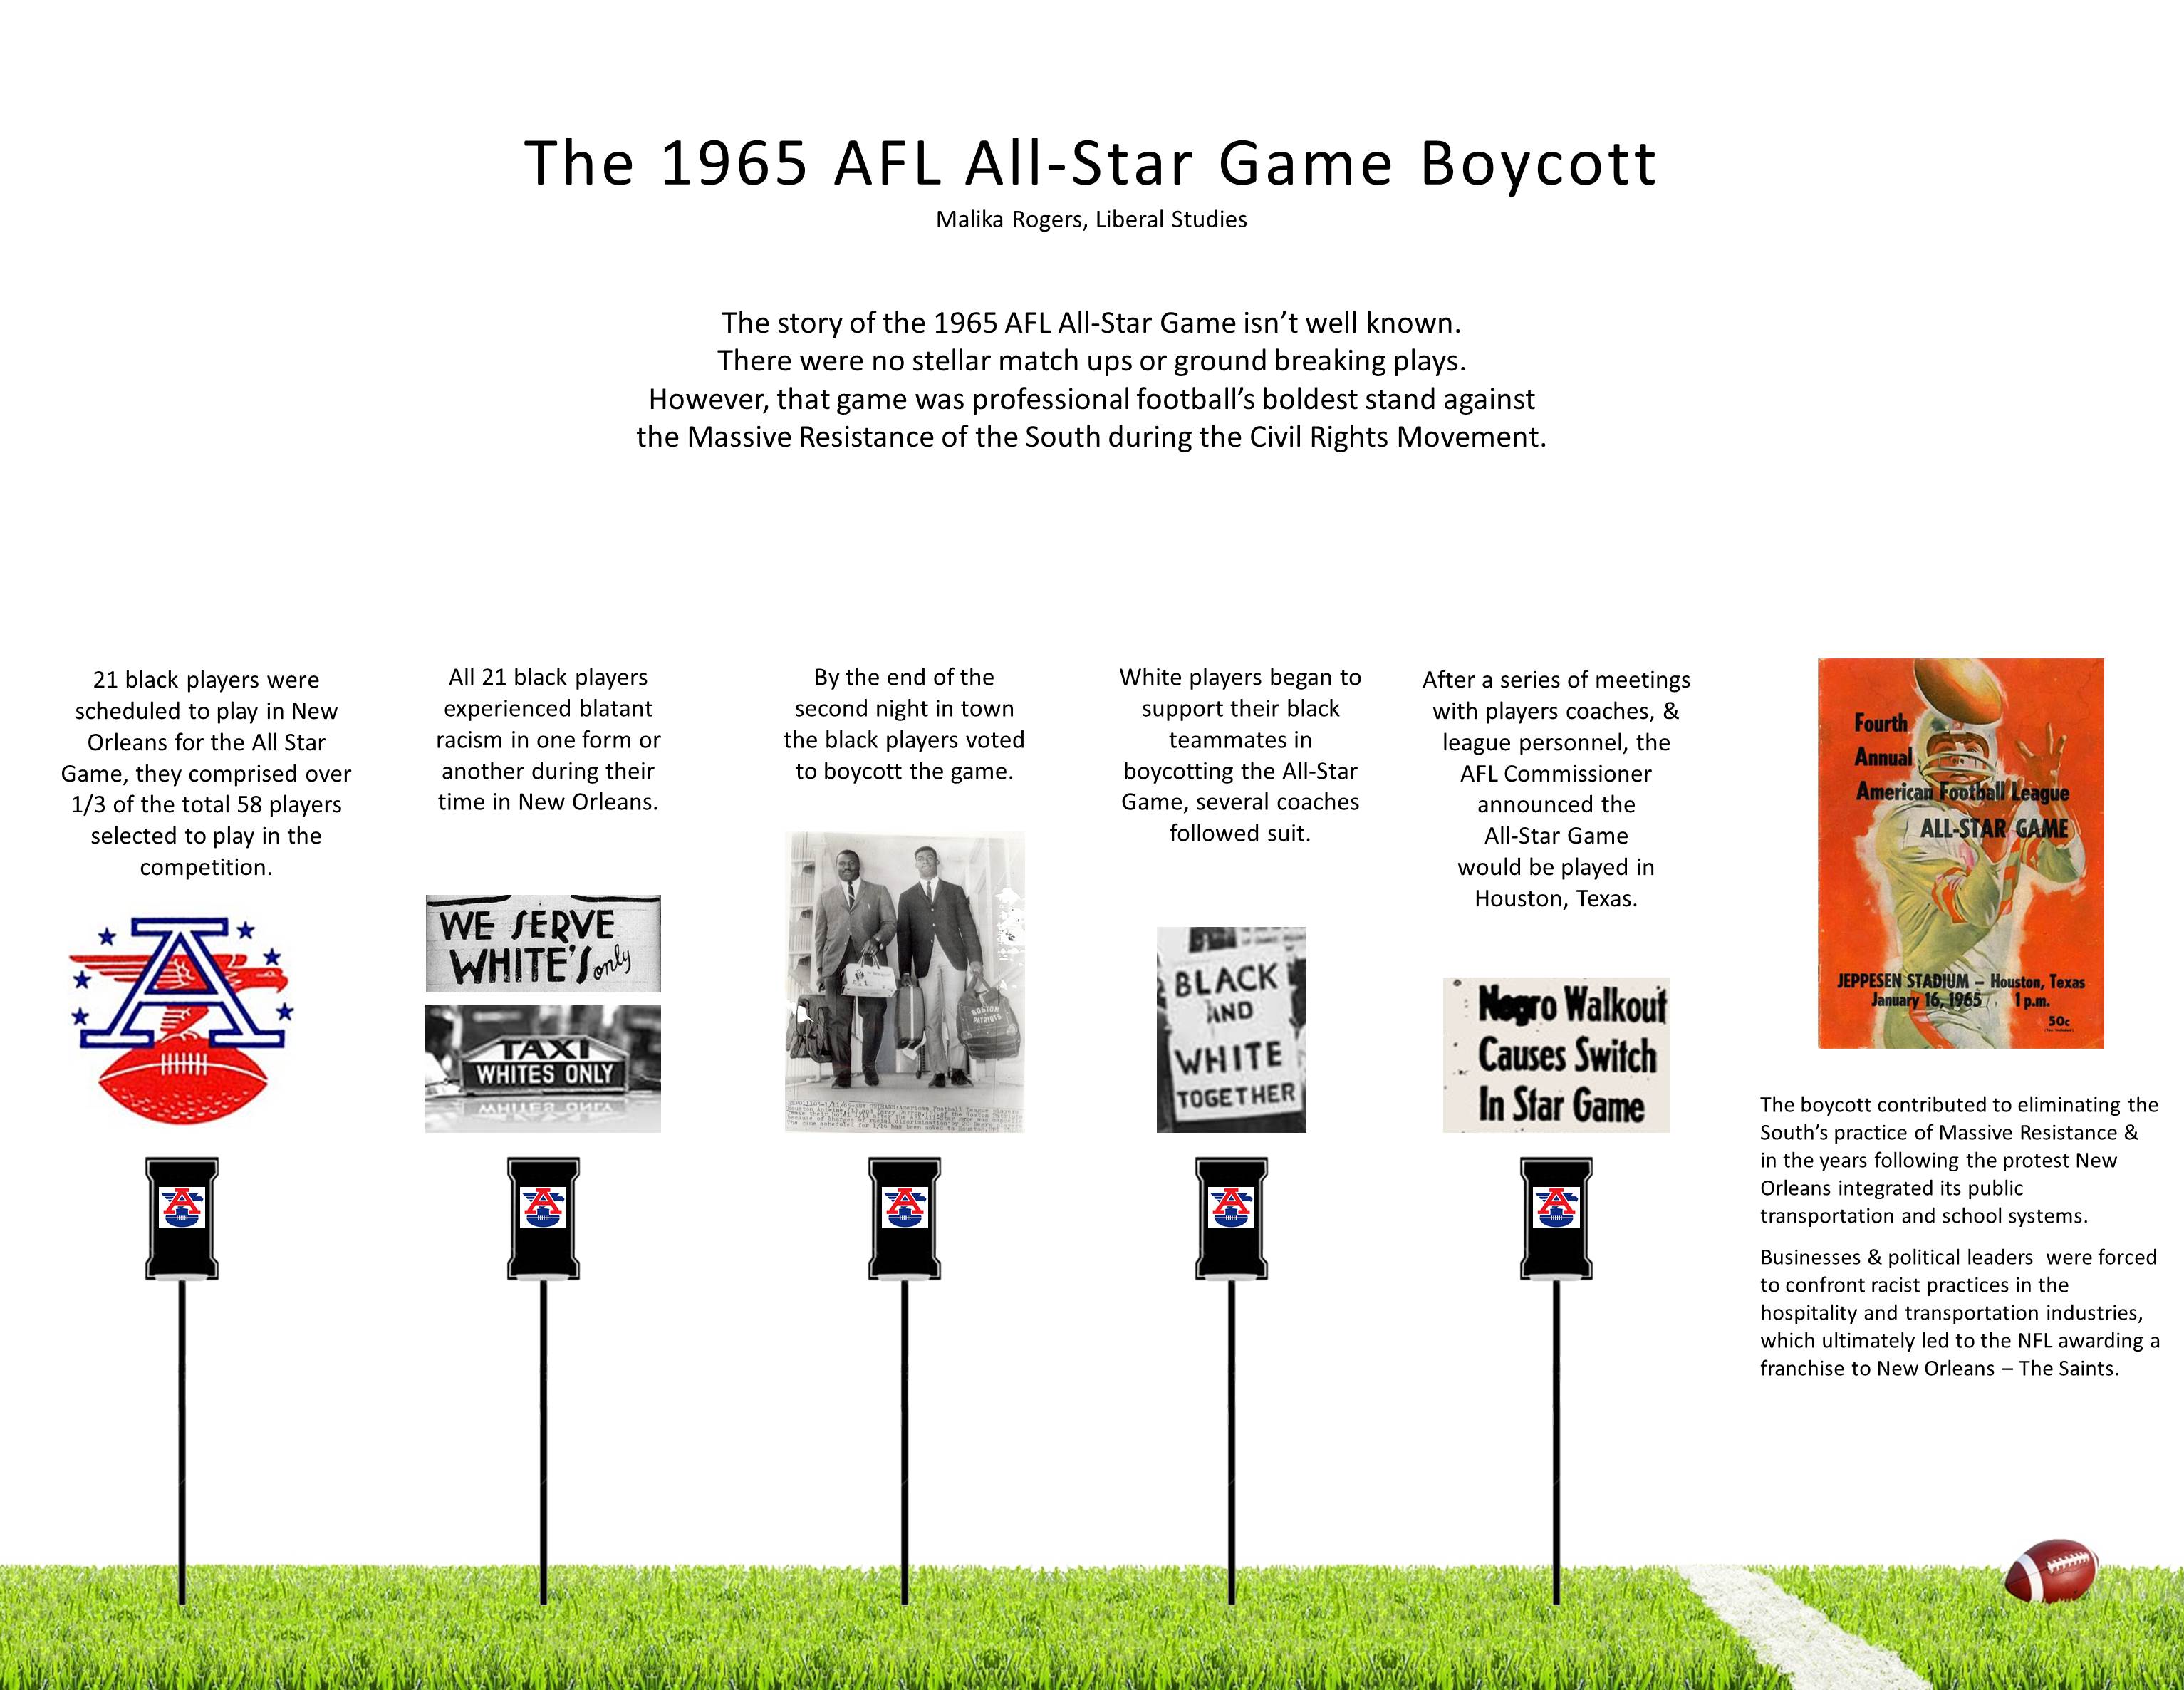 poster image: 'The 1965 AFL All-Star Game Boycott'